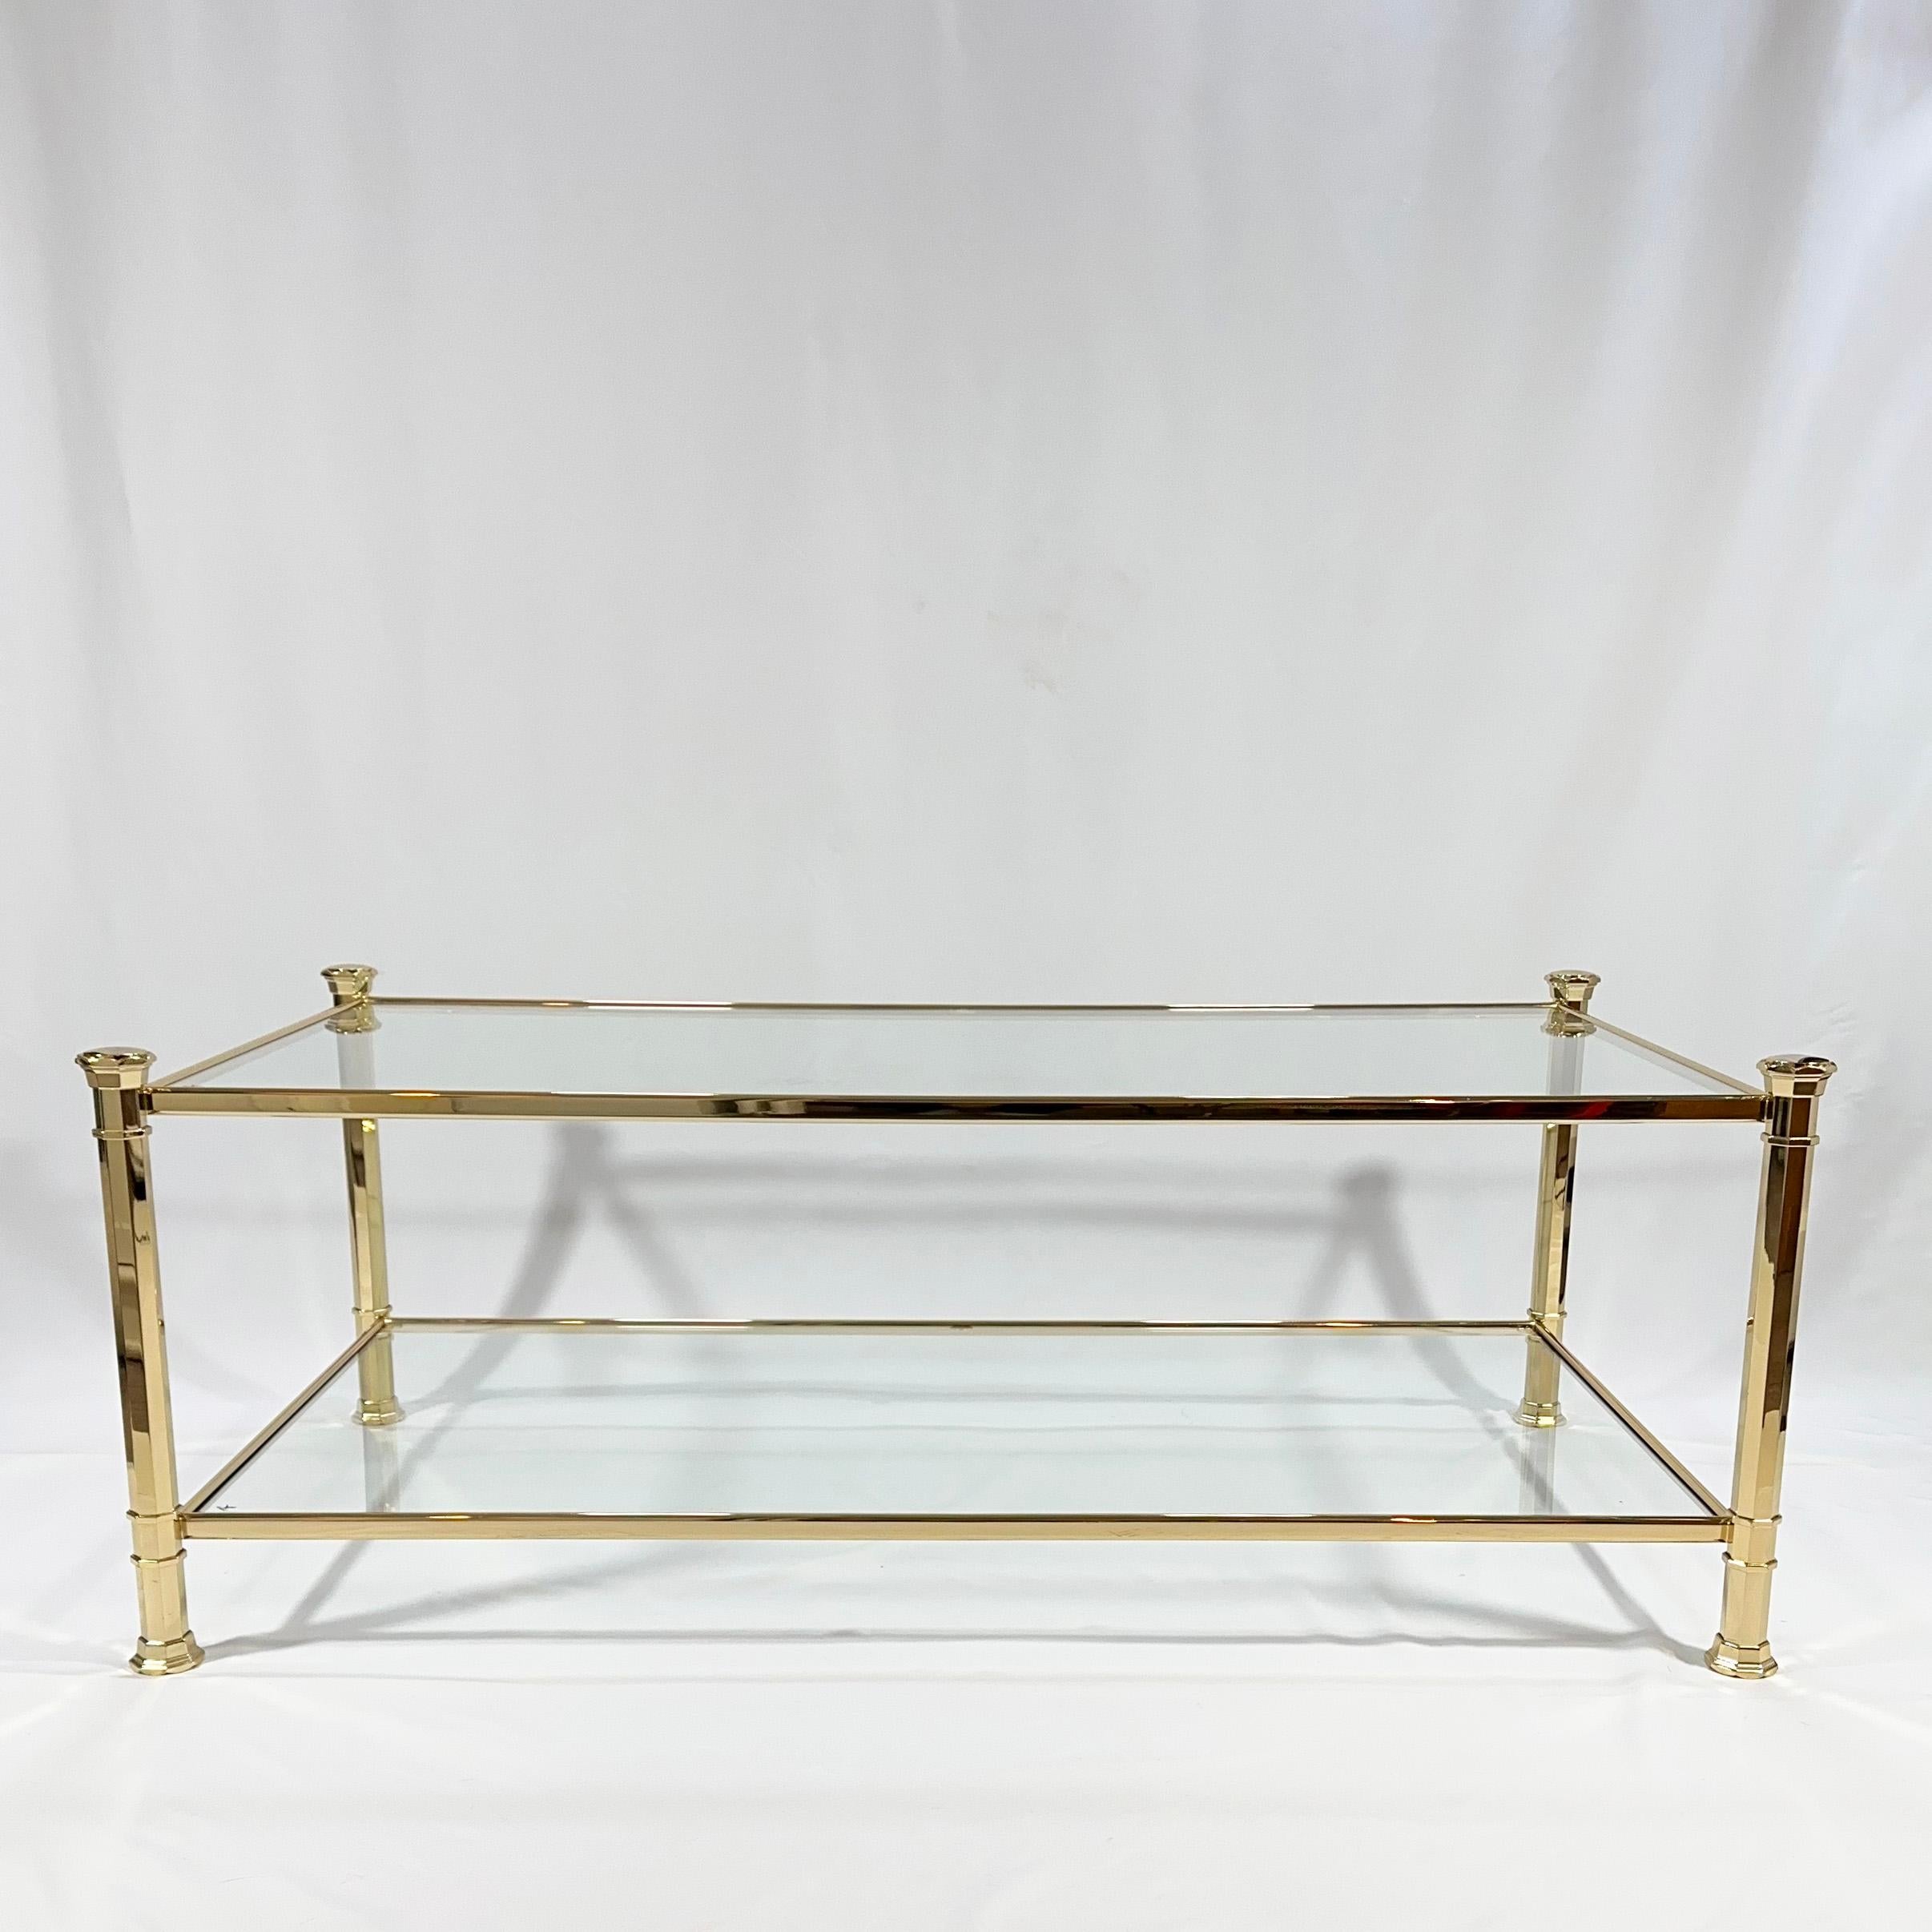 Late 20th Century 1970s French Brass Coffee Table with Glass Tiers, Neoclassical Influences